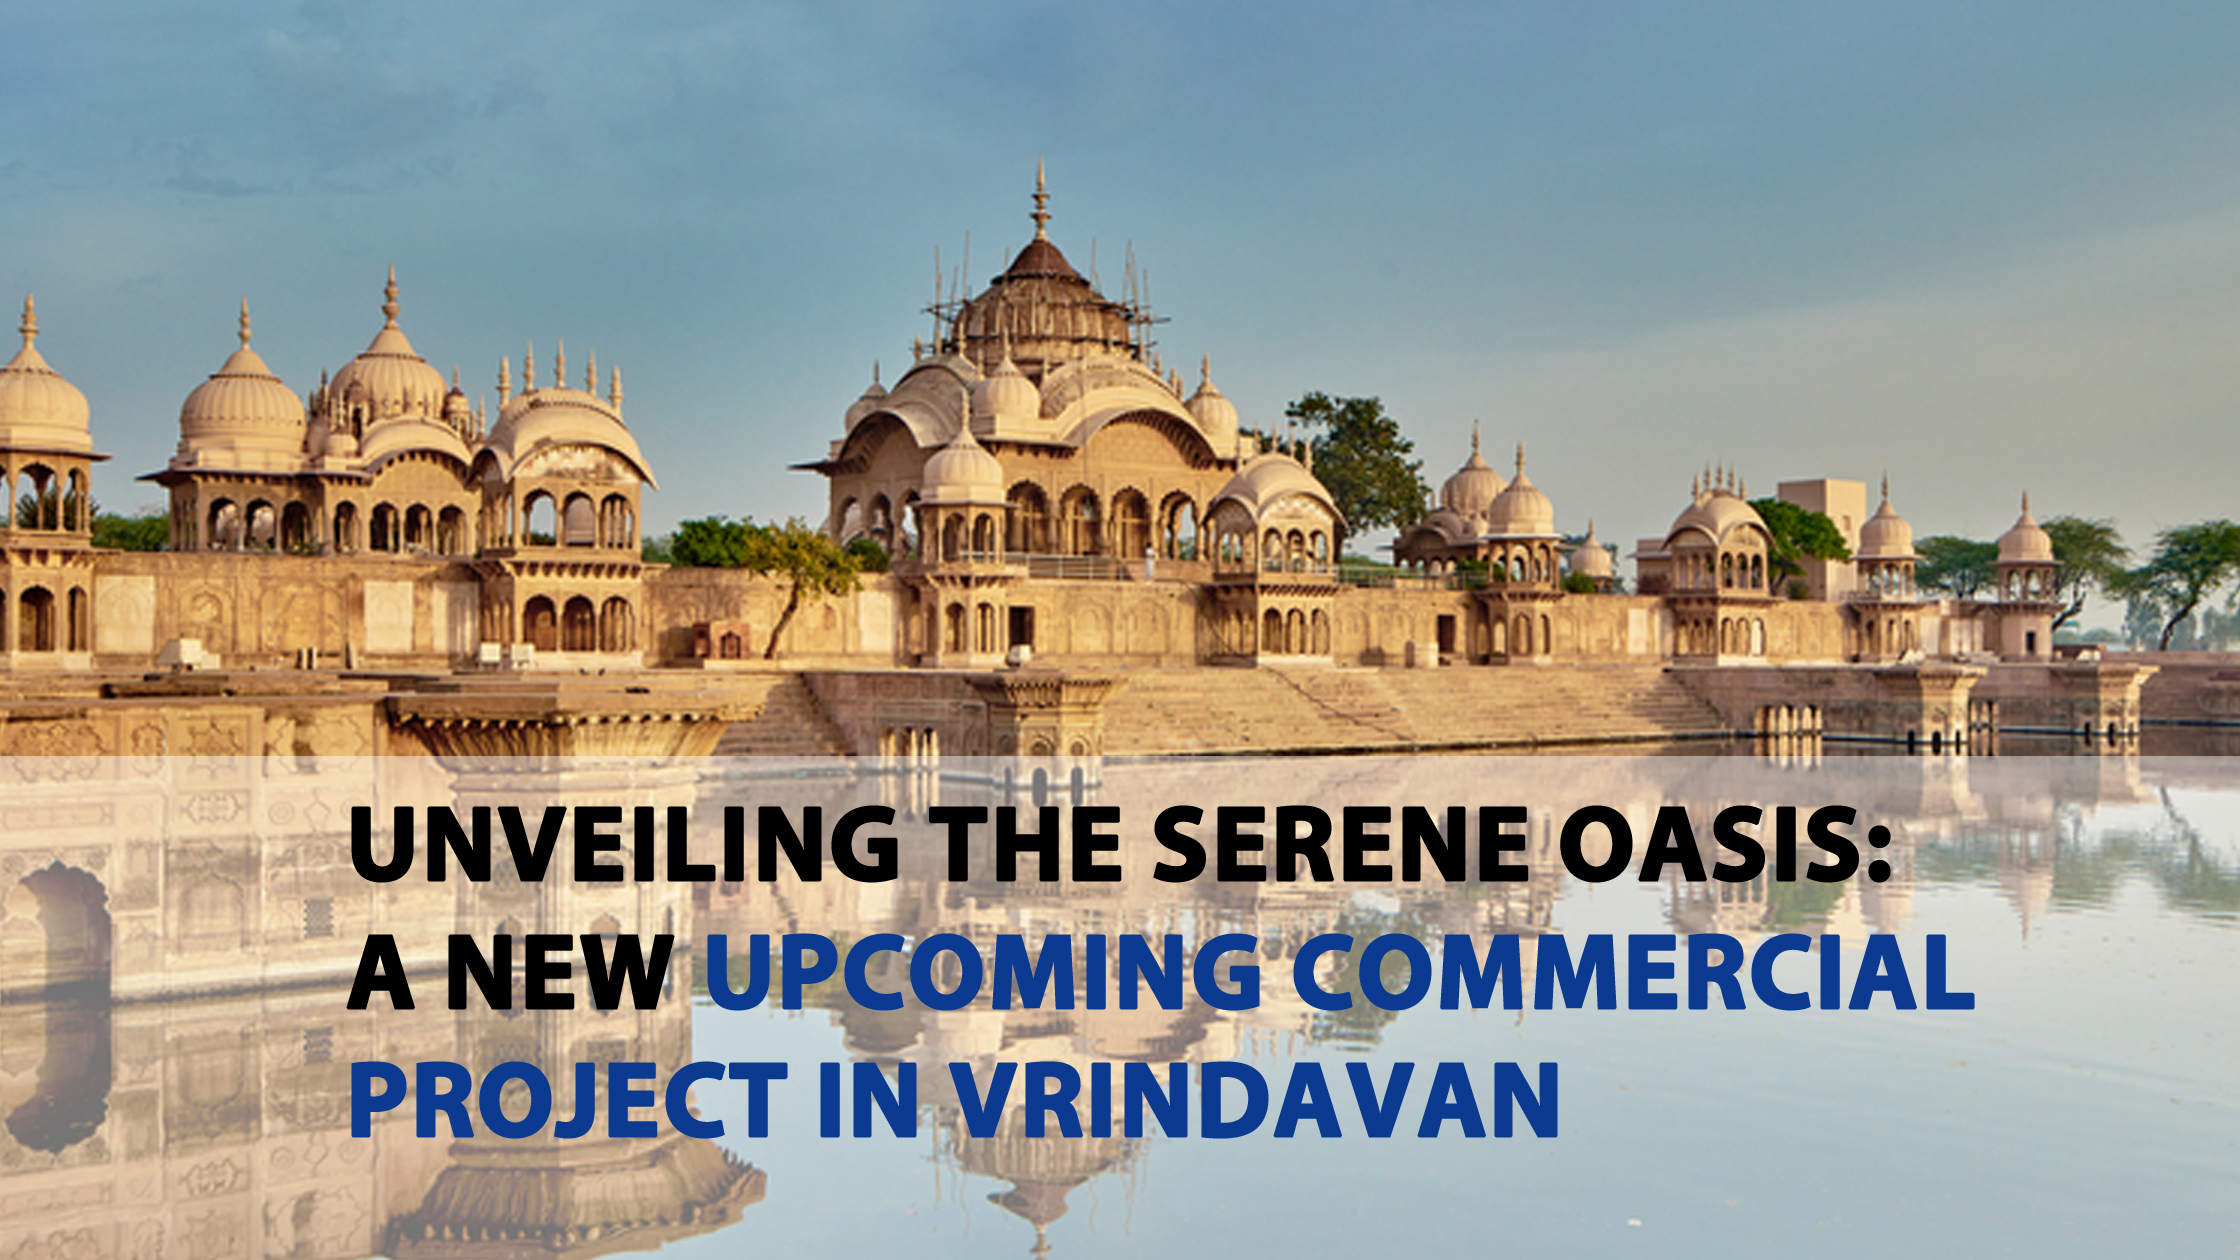 Unveiling the Serene Oasis: A New Upcoming Commercial Project in Vrindavan